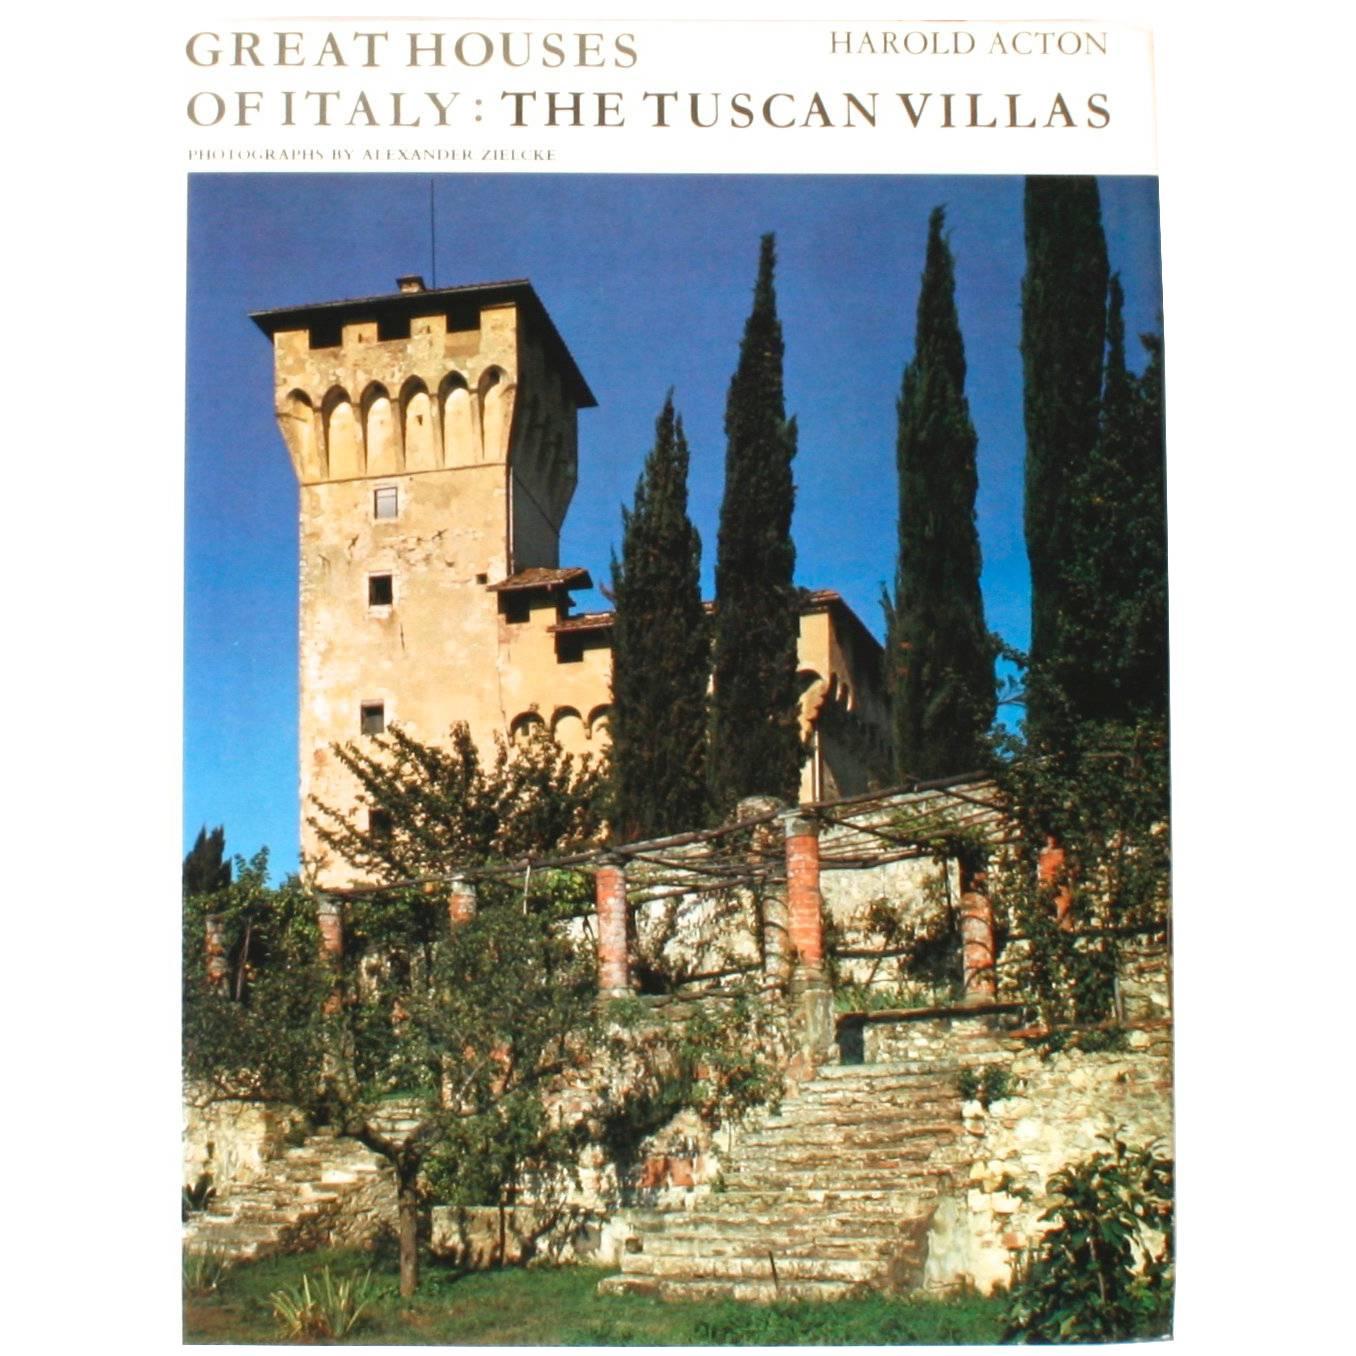 Great Houses of Italy The Tuscan Villas by Harold Acton, First Edition For Sale